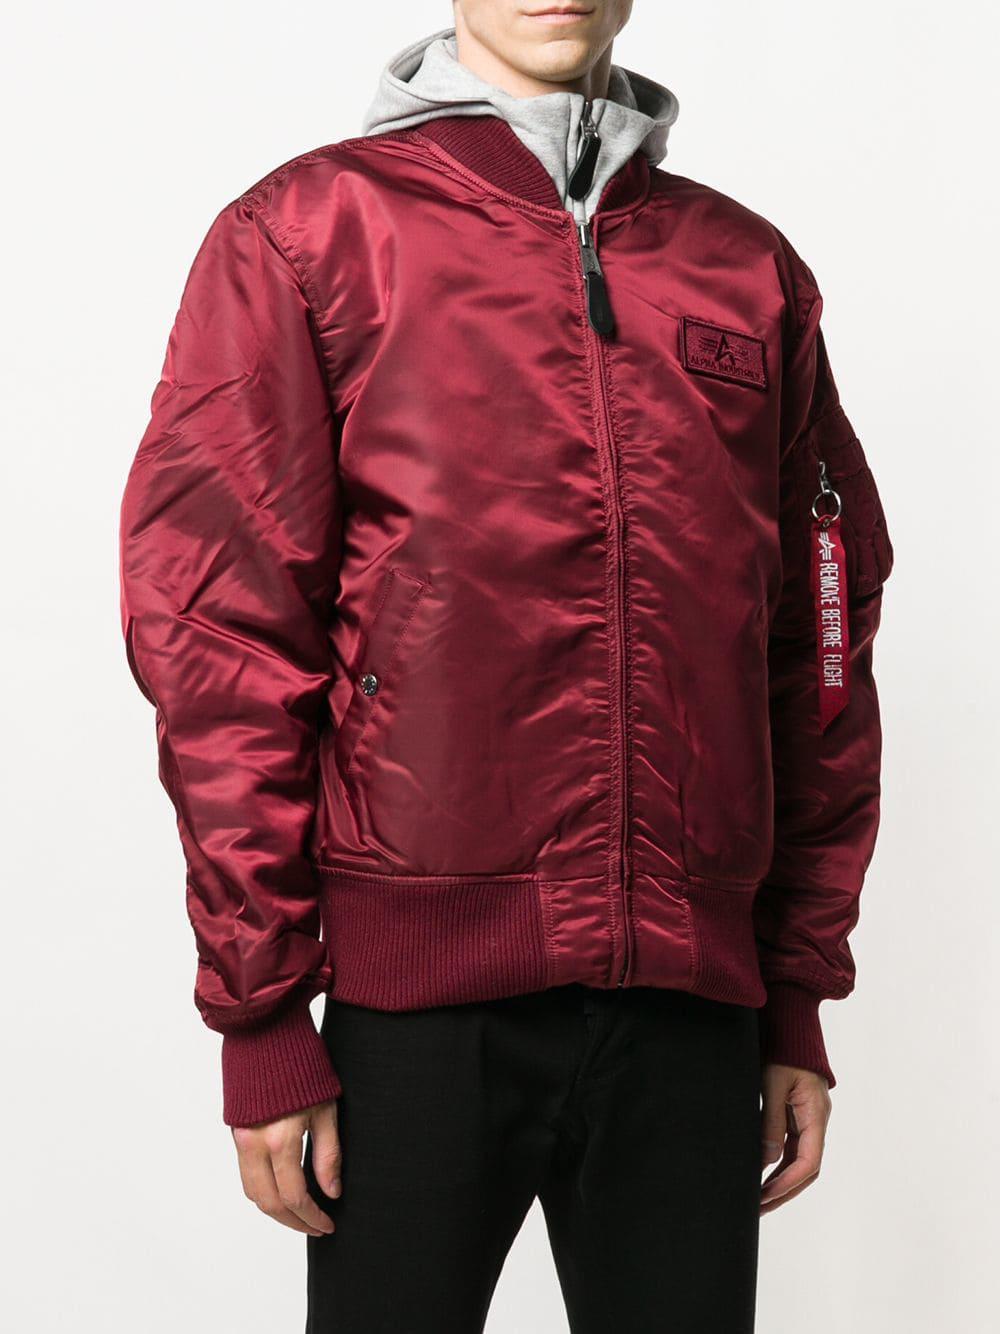 Alpha Industries Na-1 Bomber Jacket in Red for Men - Lyst